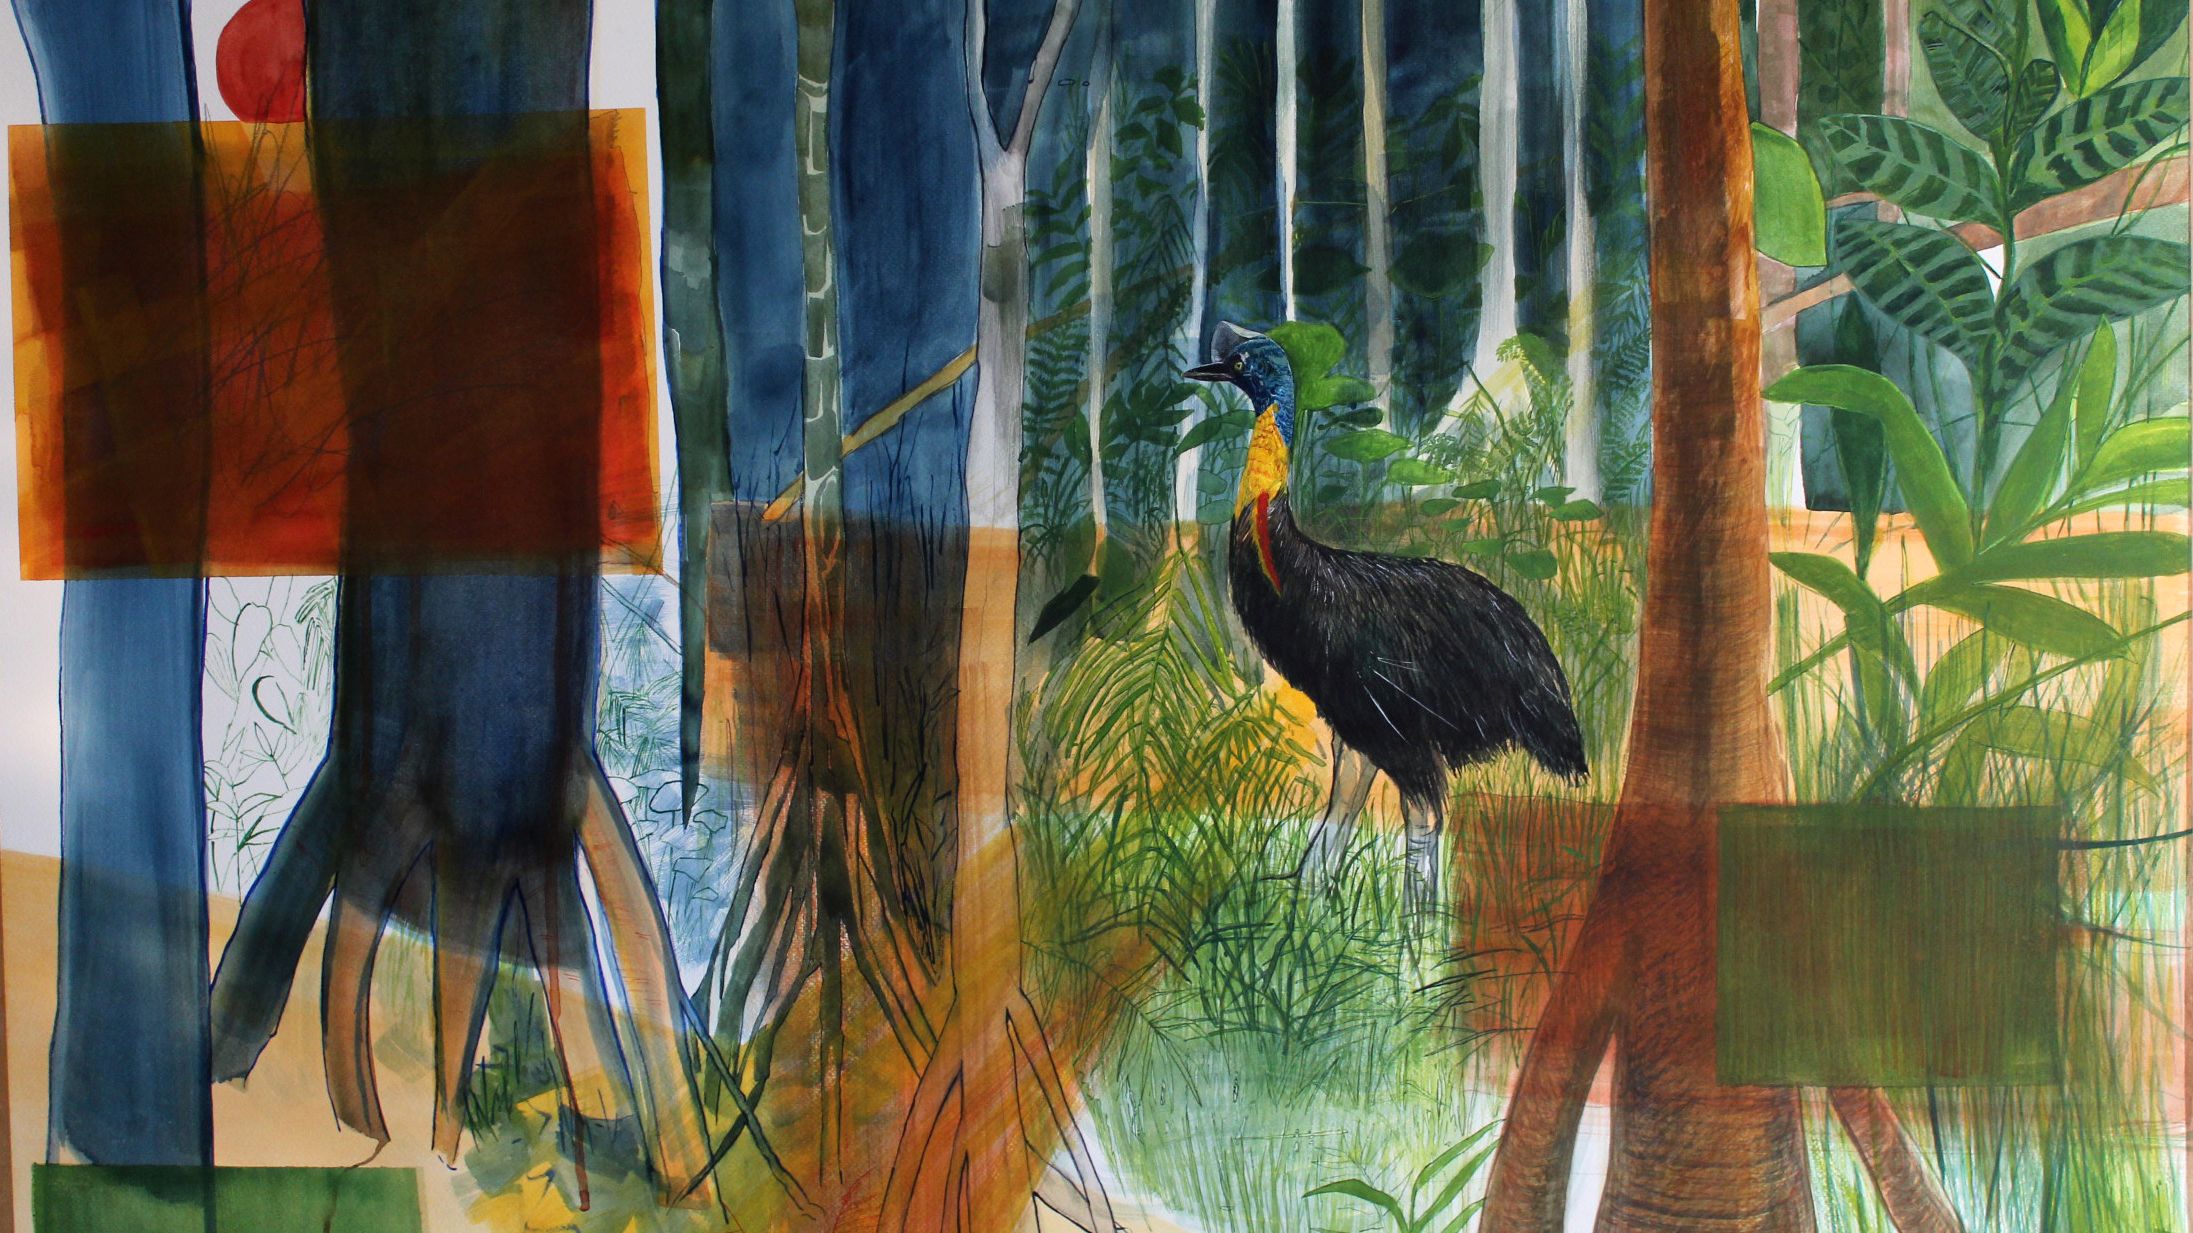 Colourful painting of a cassowary bird amongst trees 